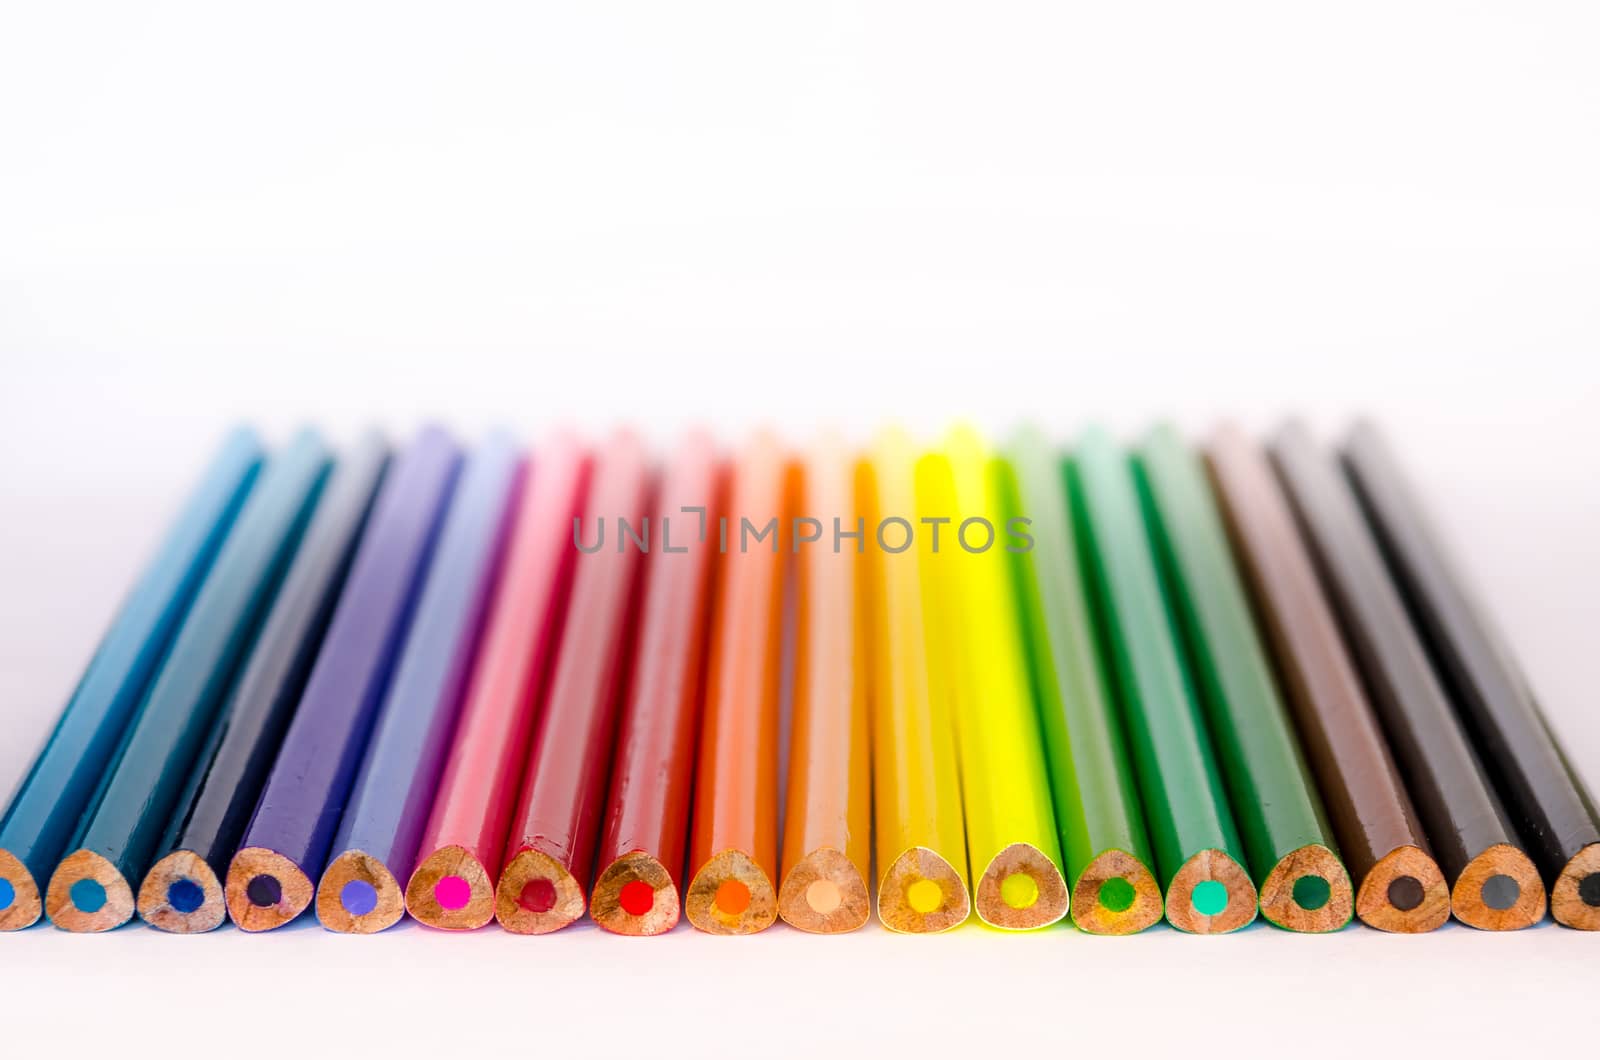 Detail of colorful pencils in a row on white background